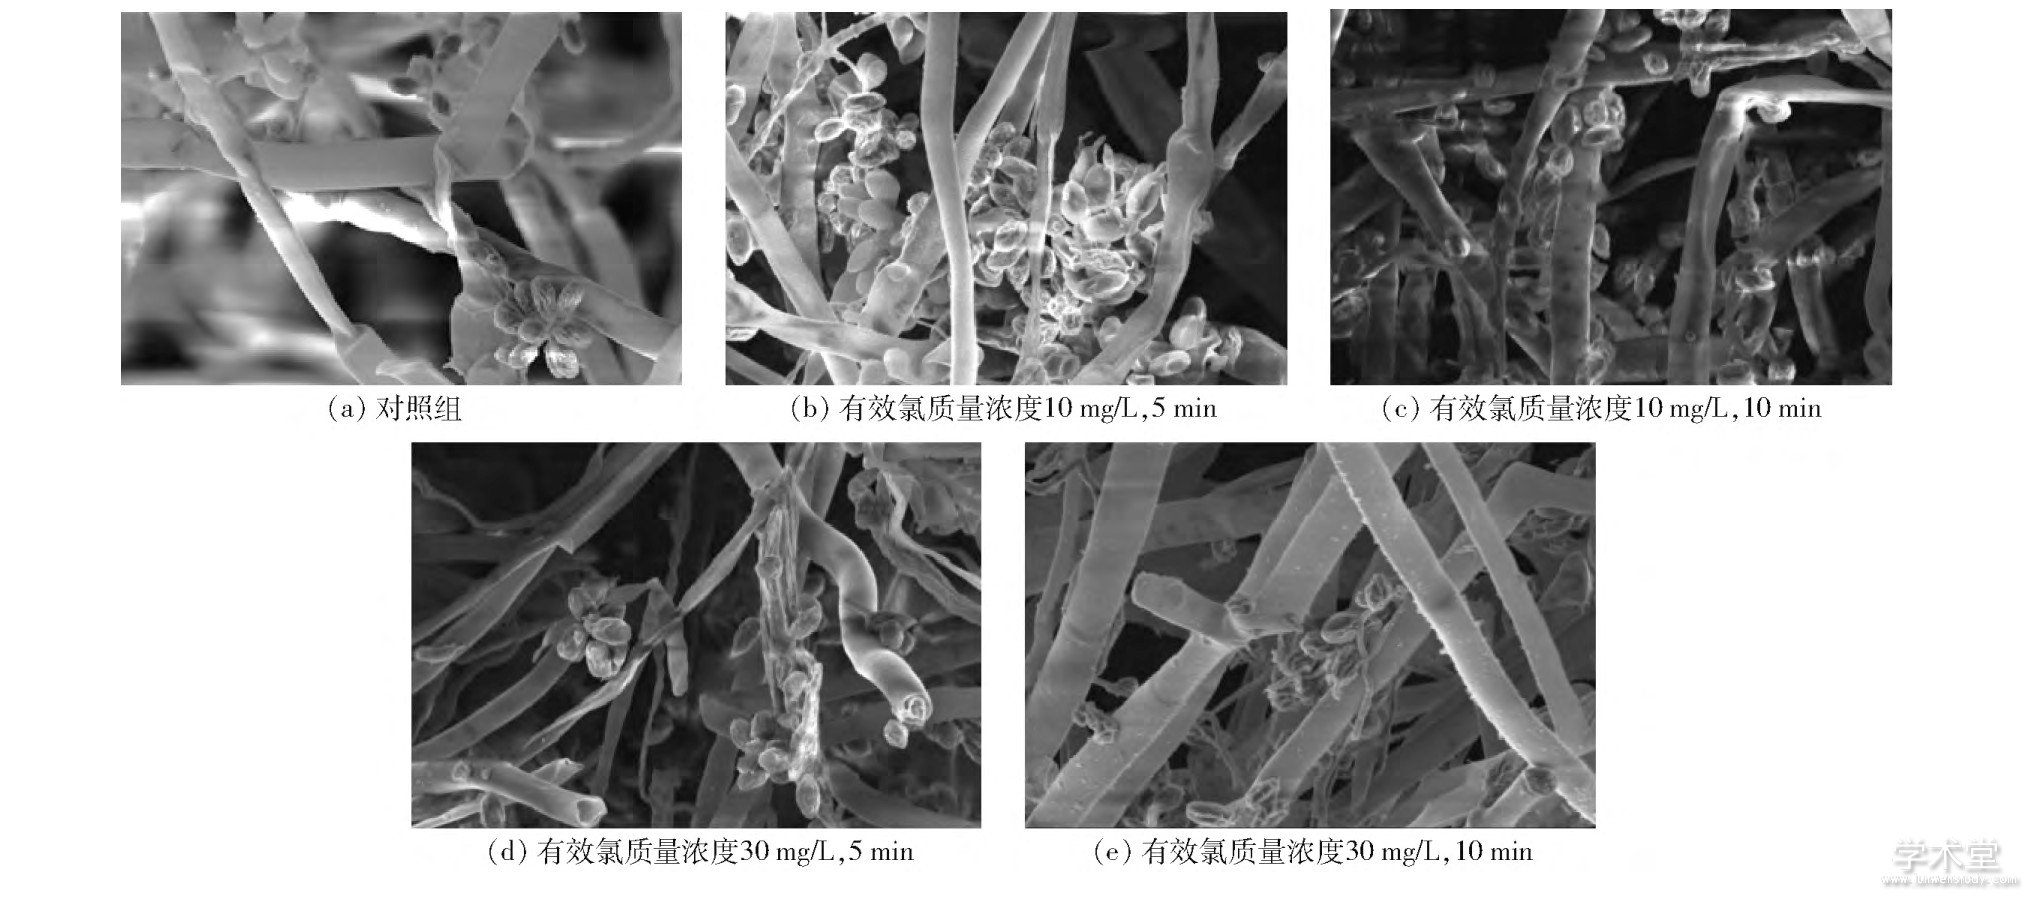 ͼ1 ΢ԵˮԻߴǰɨ羵ͼFig.1 SEM photos of Botrytis cinerea before and after slightly acidic electrolyzed water treatment